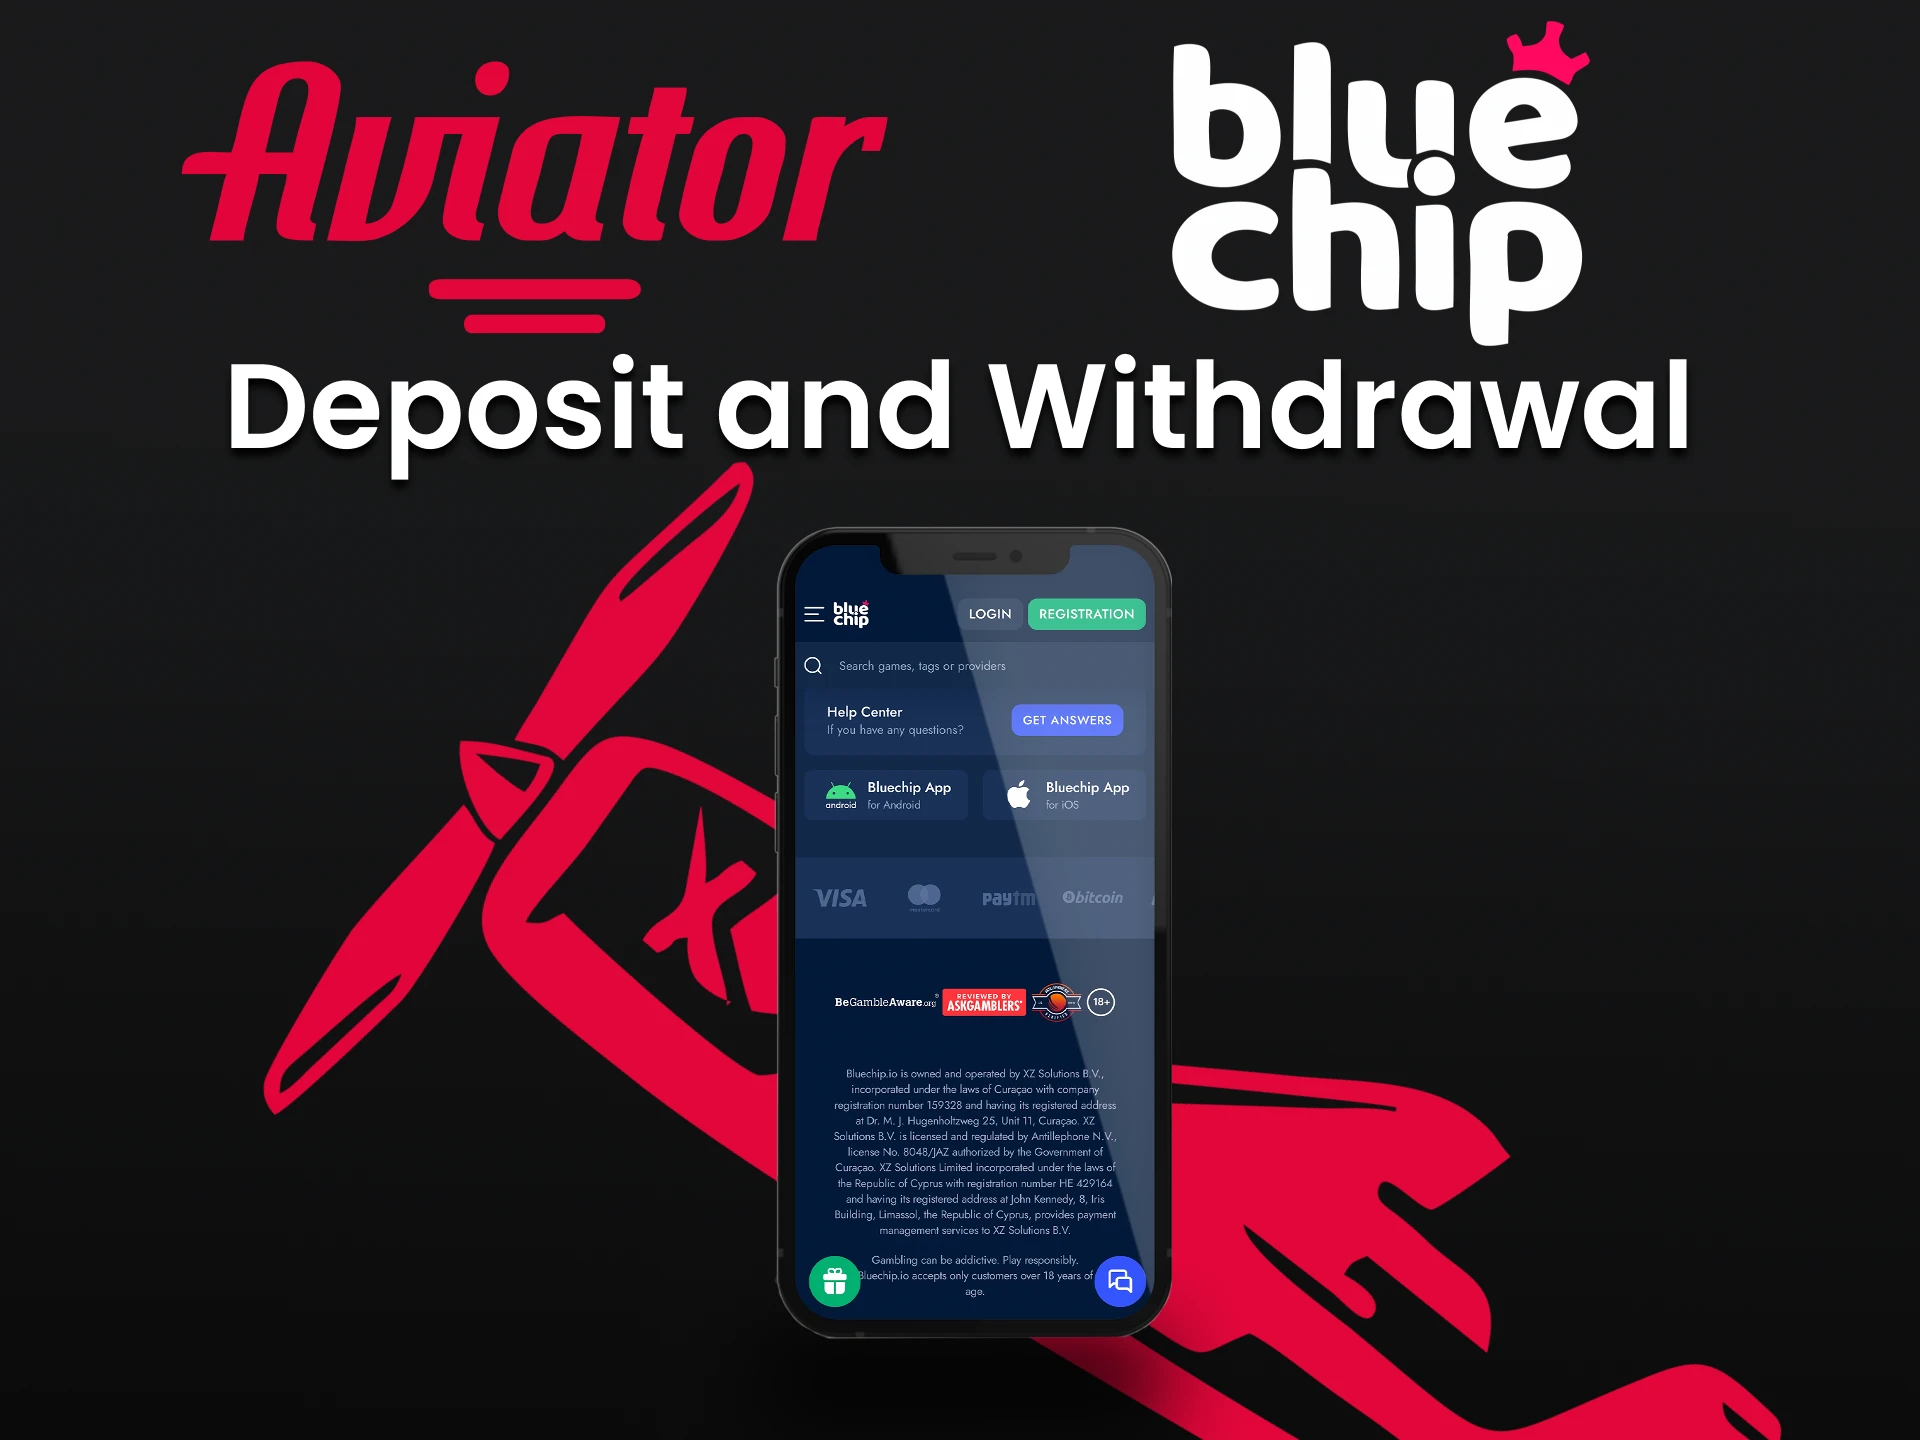 There are many ways to deposit and withdraw money in the Bluechip application.